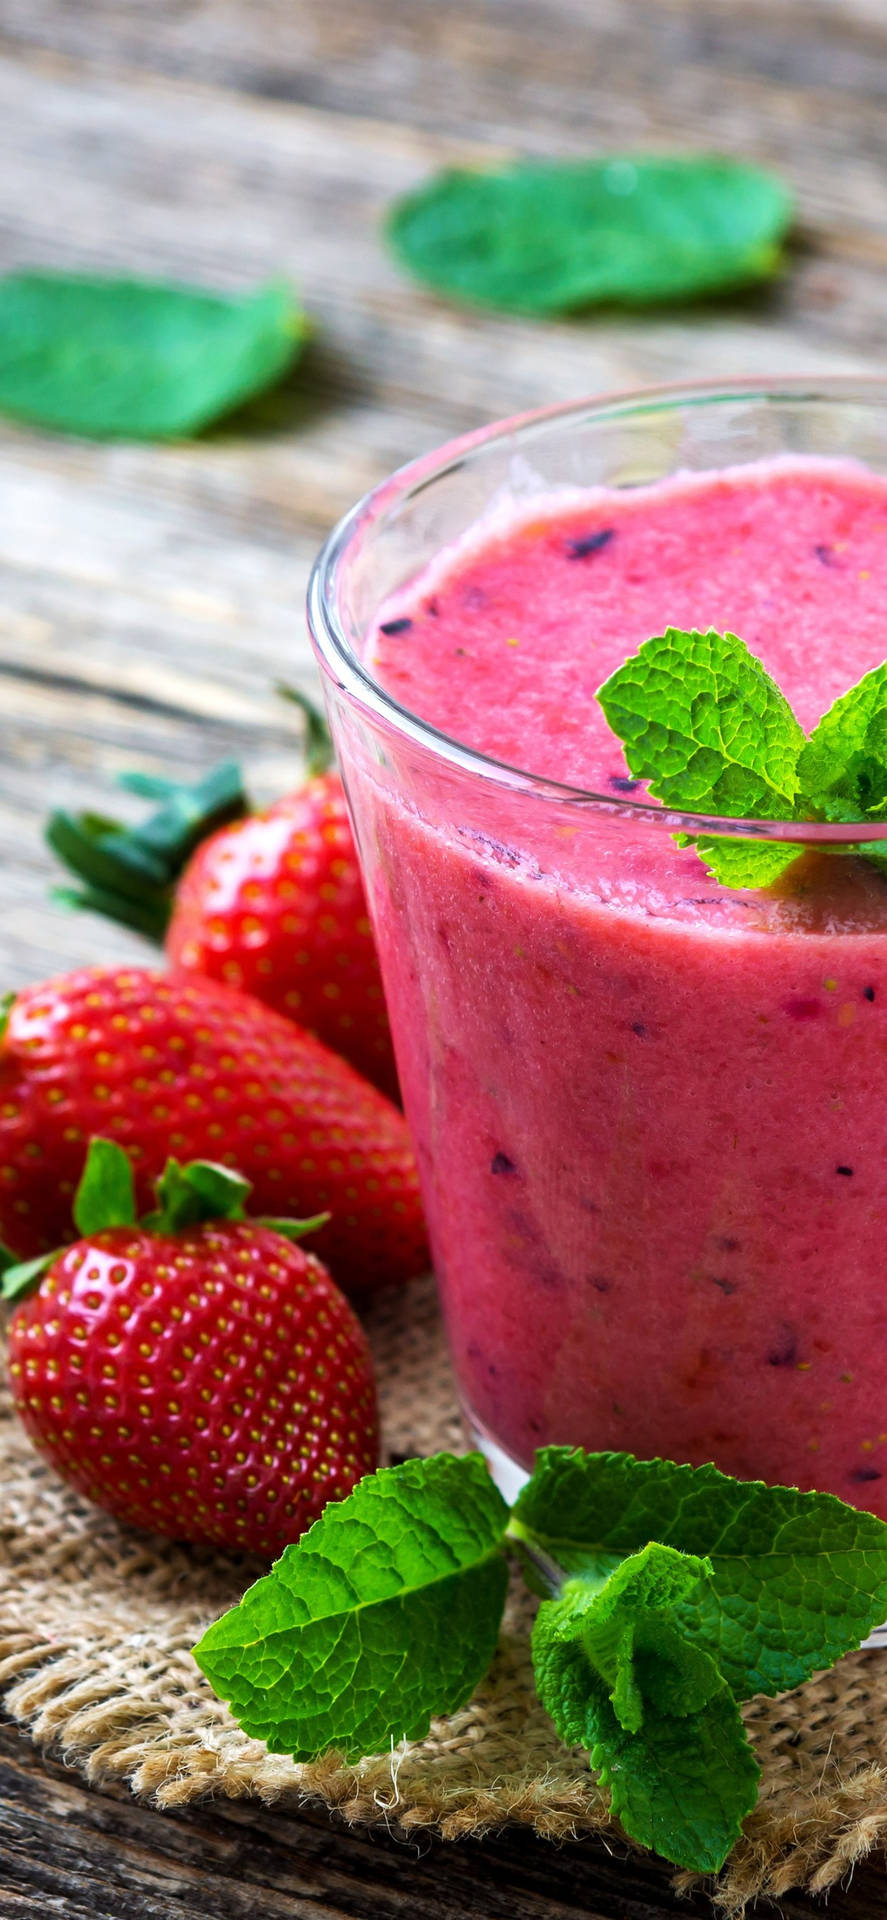 Download Smoothie With Strawberry And Leaf Wallpaper | Wallpapers.com